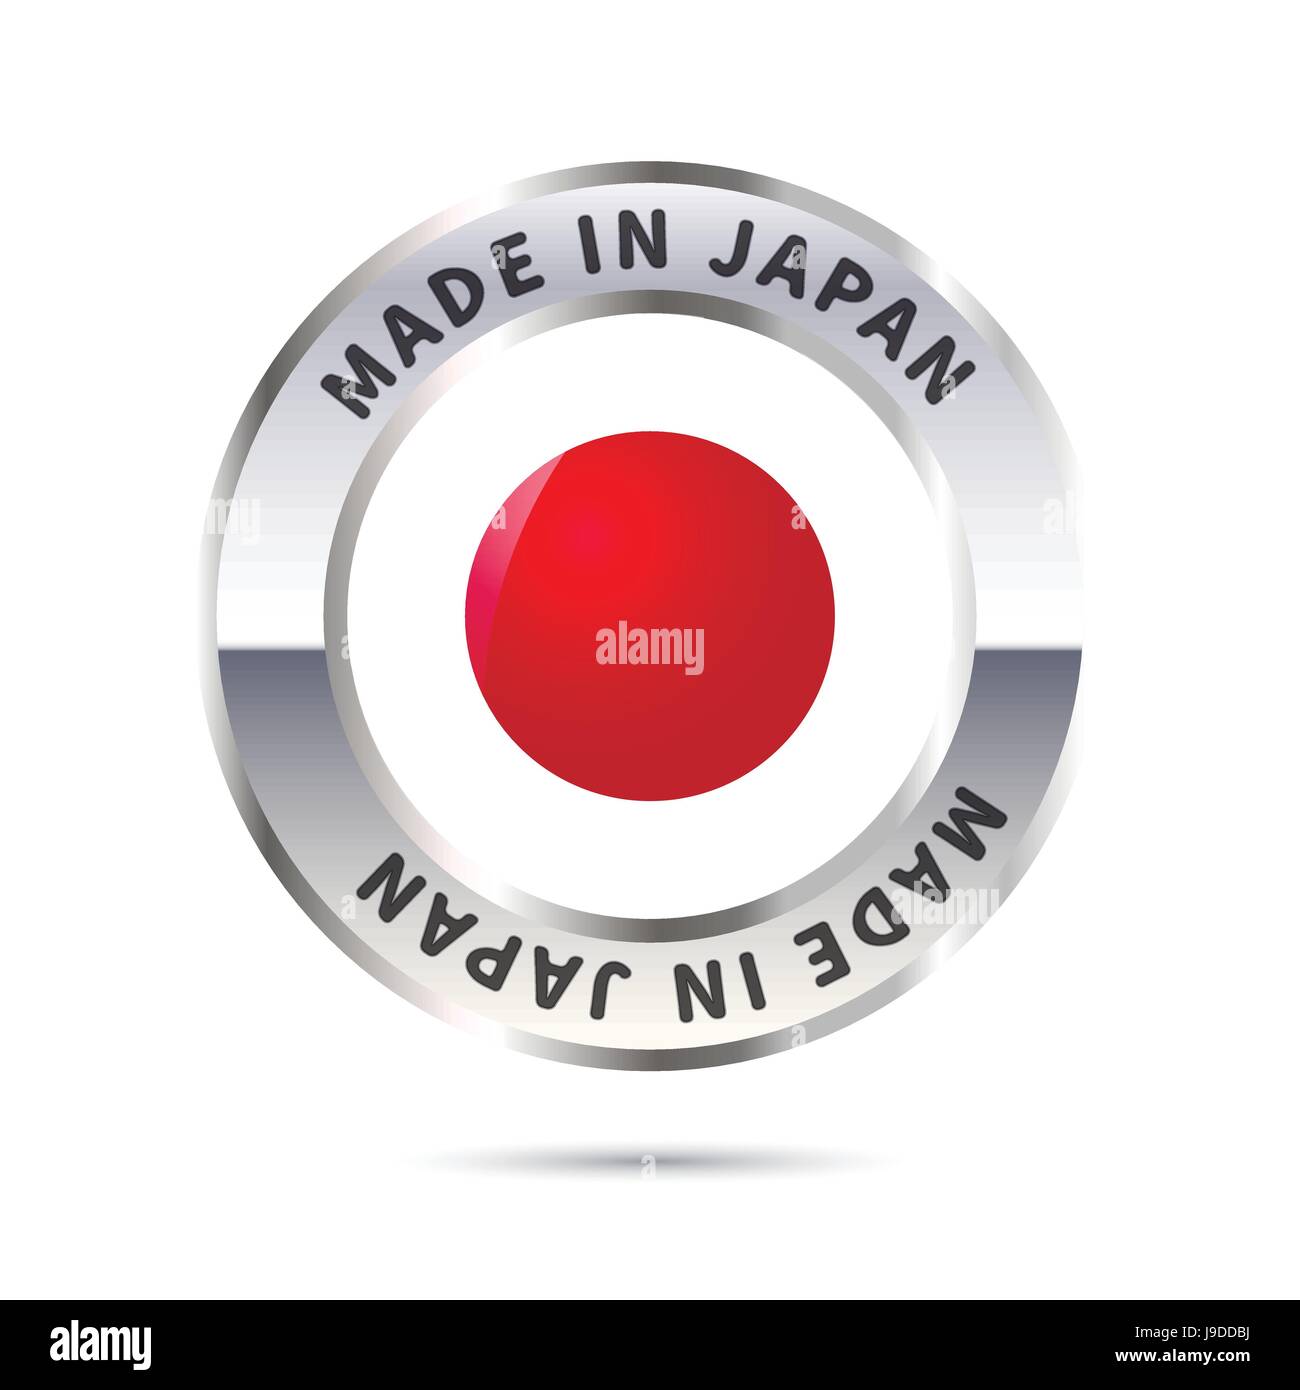 Metal badge icon, made in Japan with flag Stock Vector